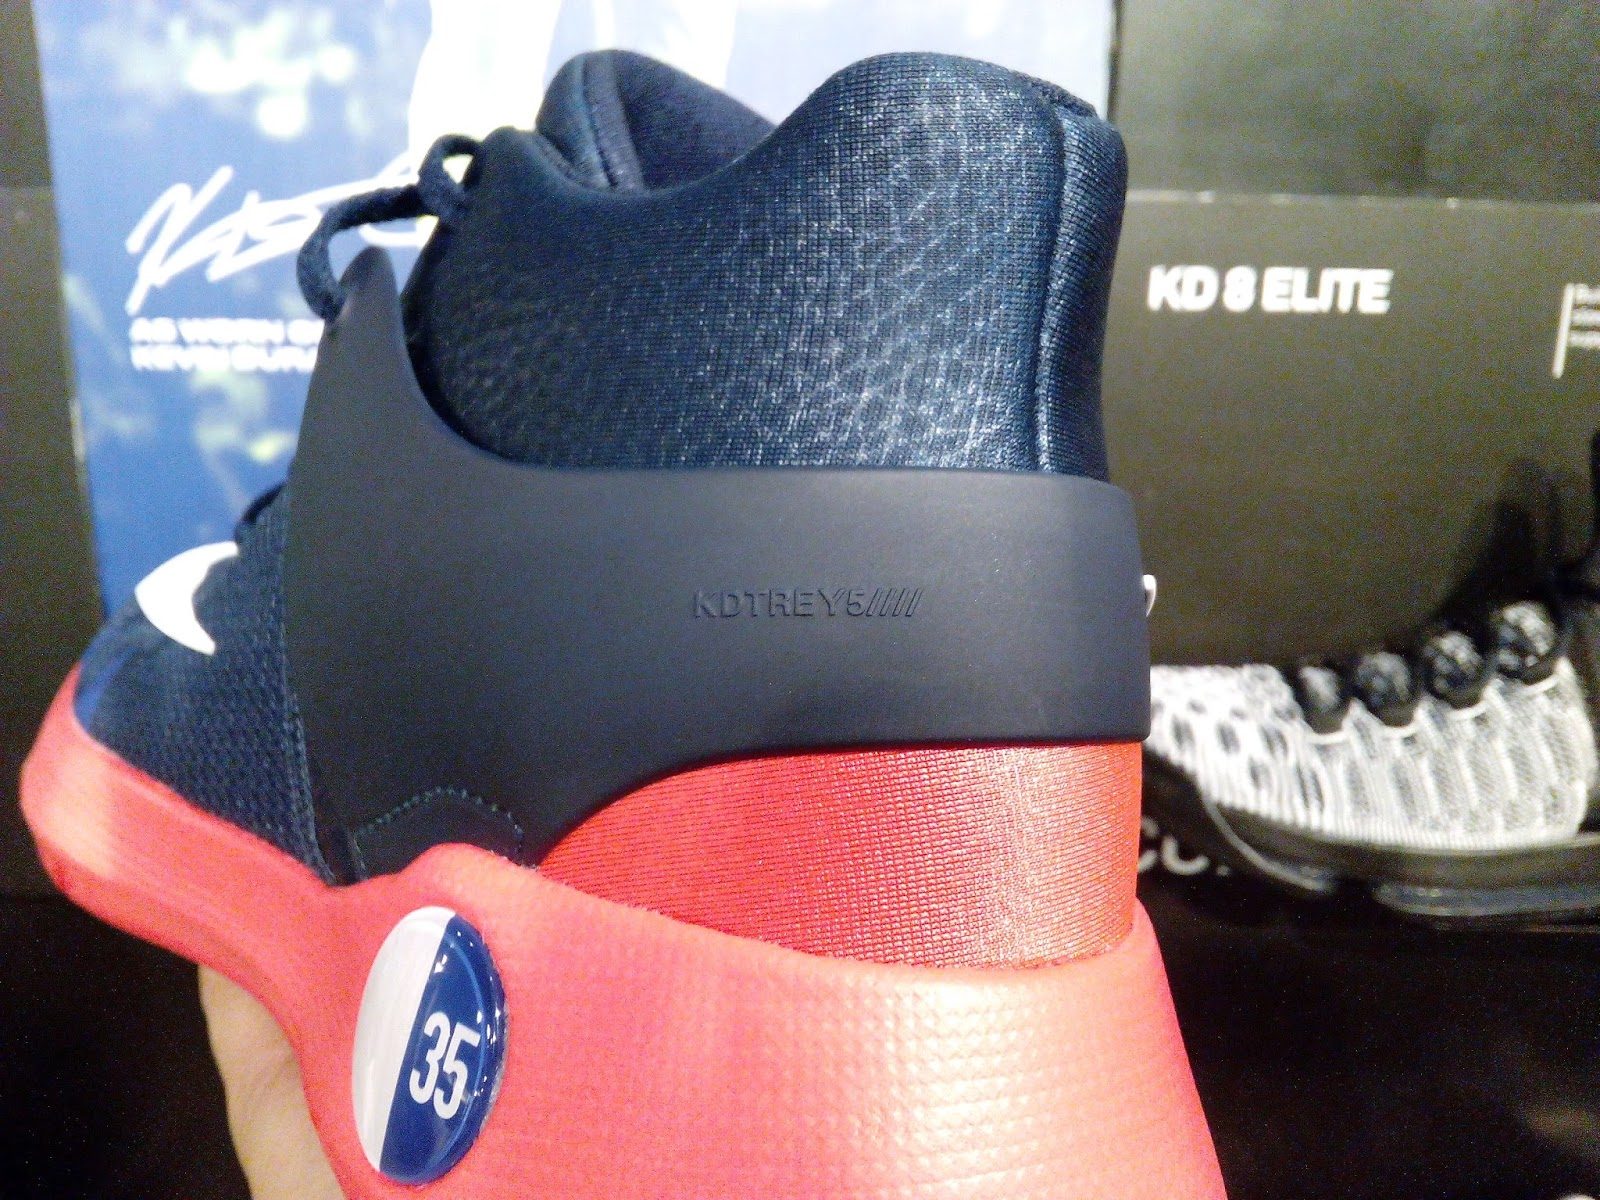 kd trey 5 iv performance review